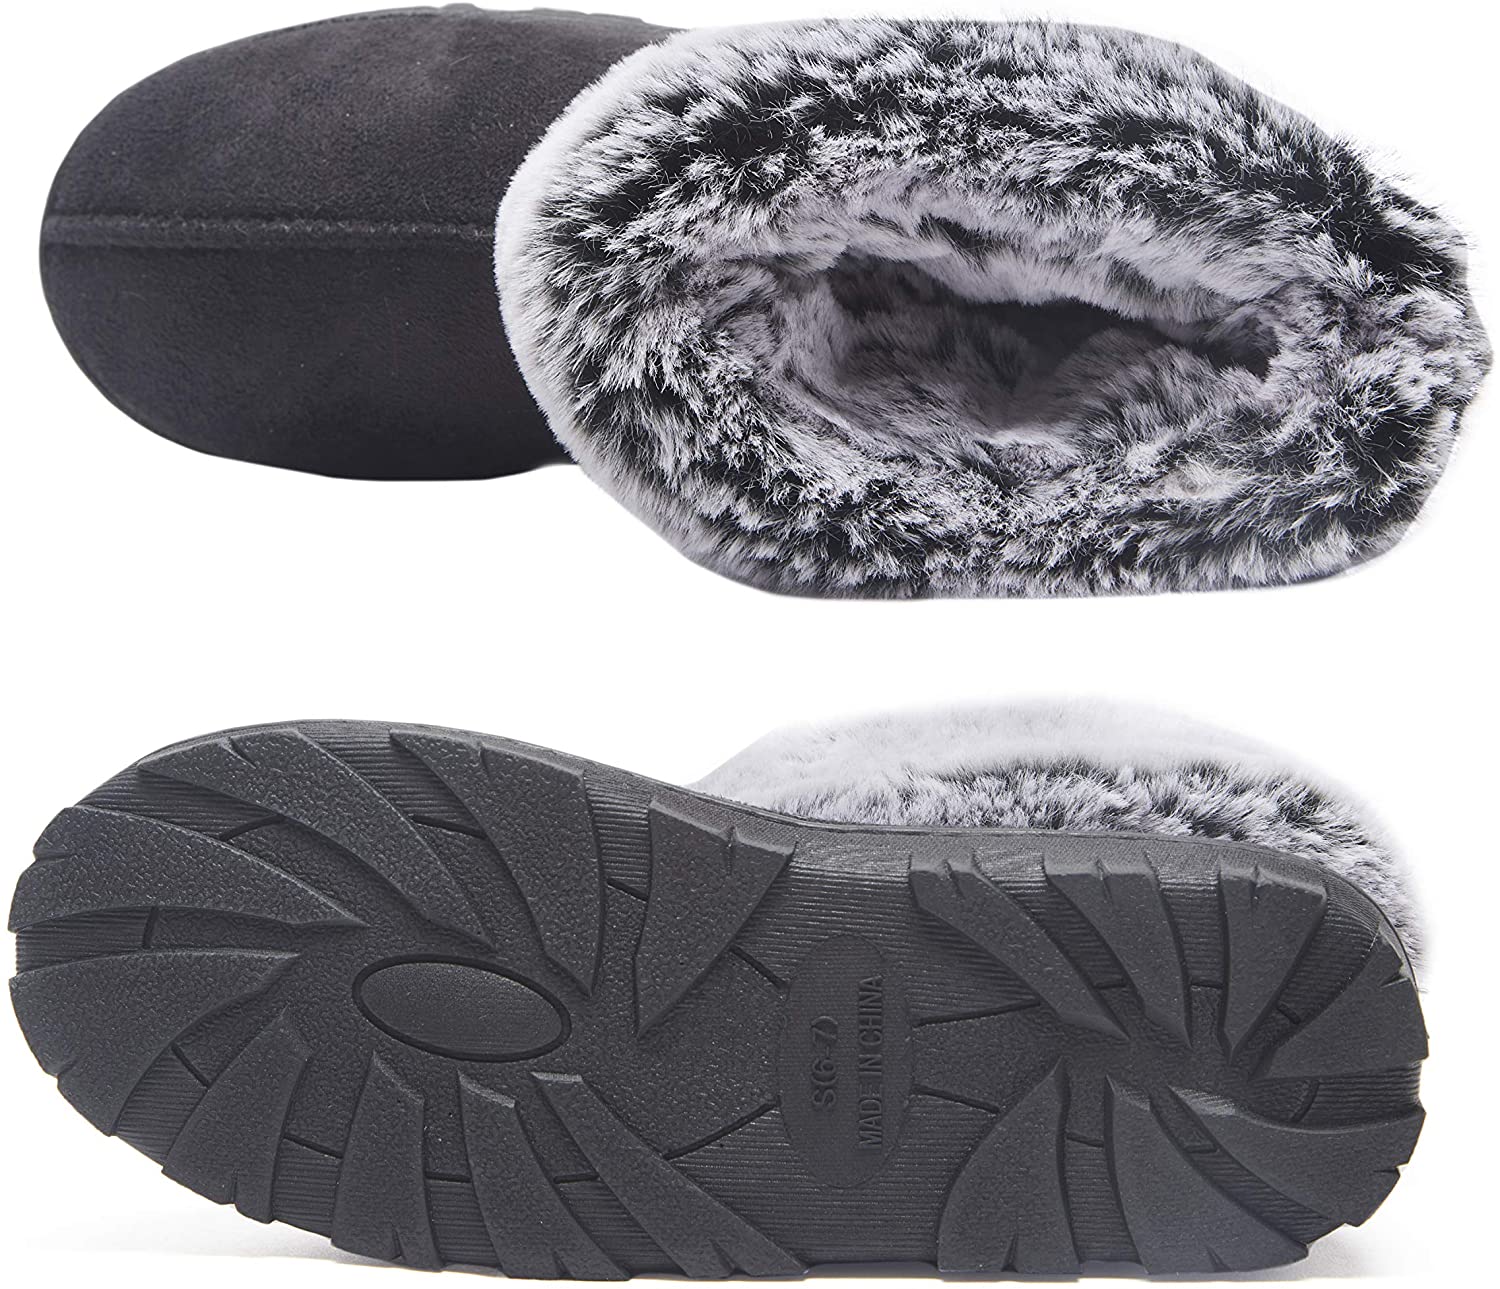 Jessica Simpson Women's and Girls Microsuede Super Soft Bootie Slippers with Indoor Outdoor Sole Mommy & Me Set Options 